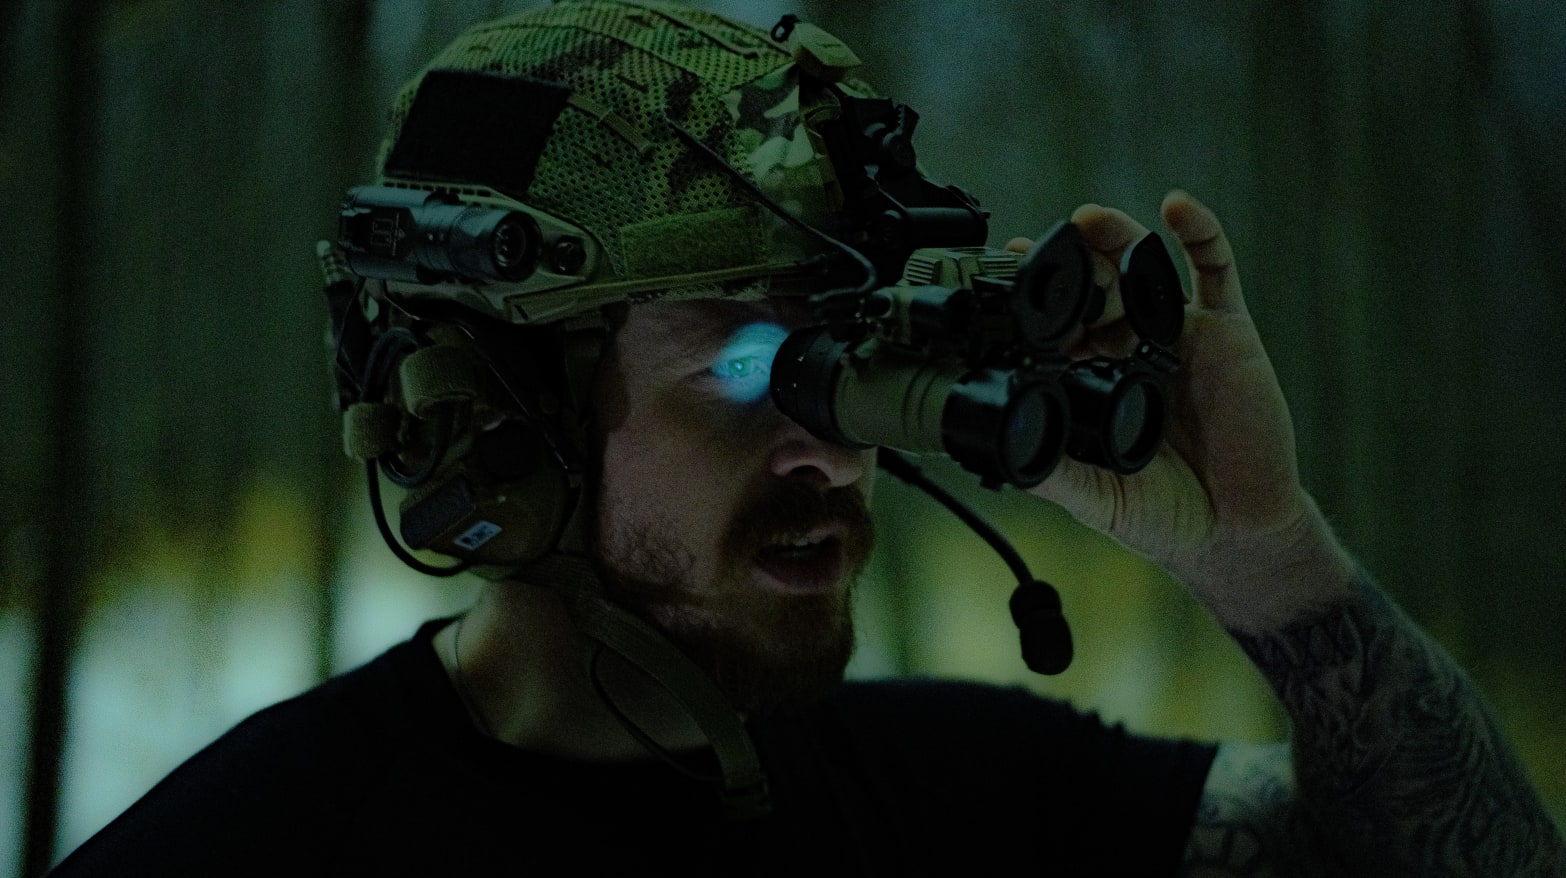 Here's what full-color night vision looks like now